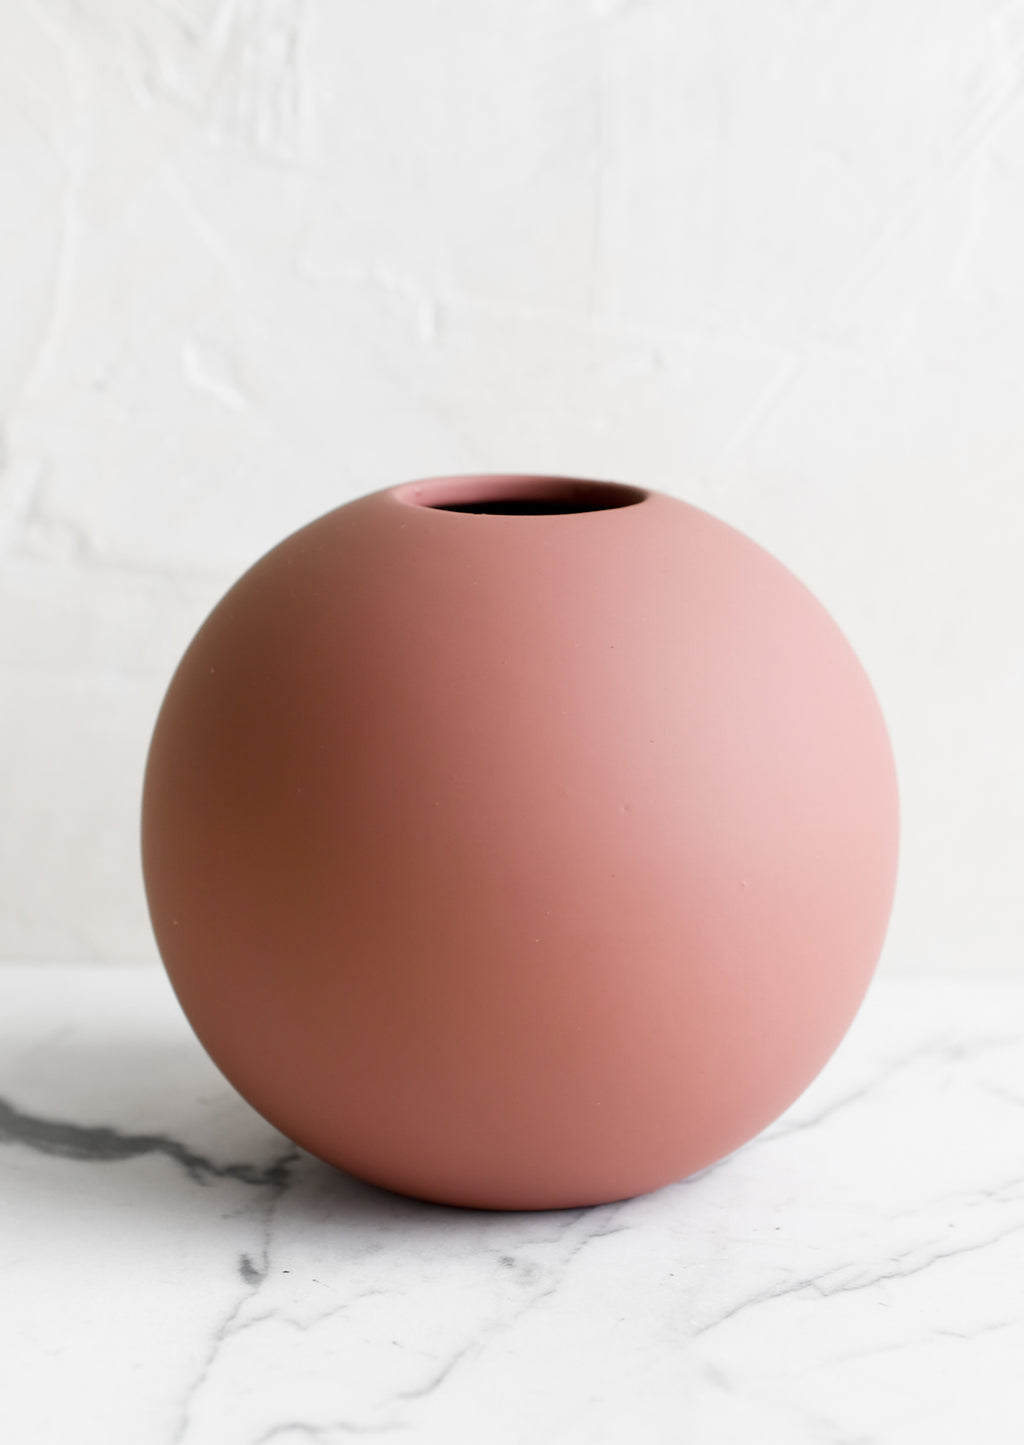 2: A round matte orb-shaped vase in dusty rose color.